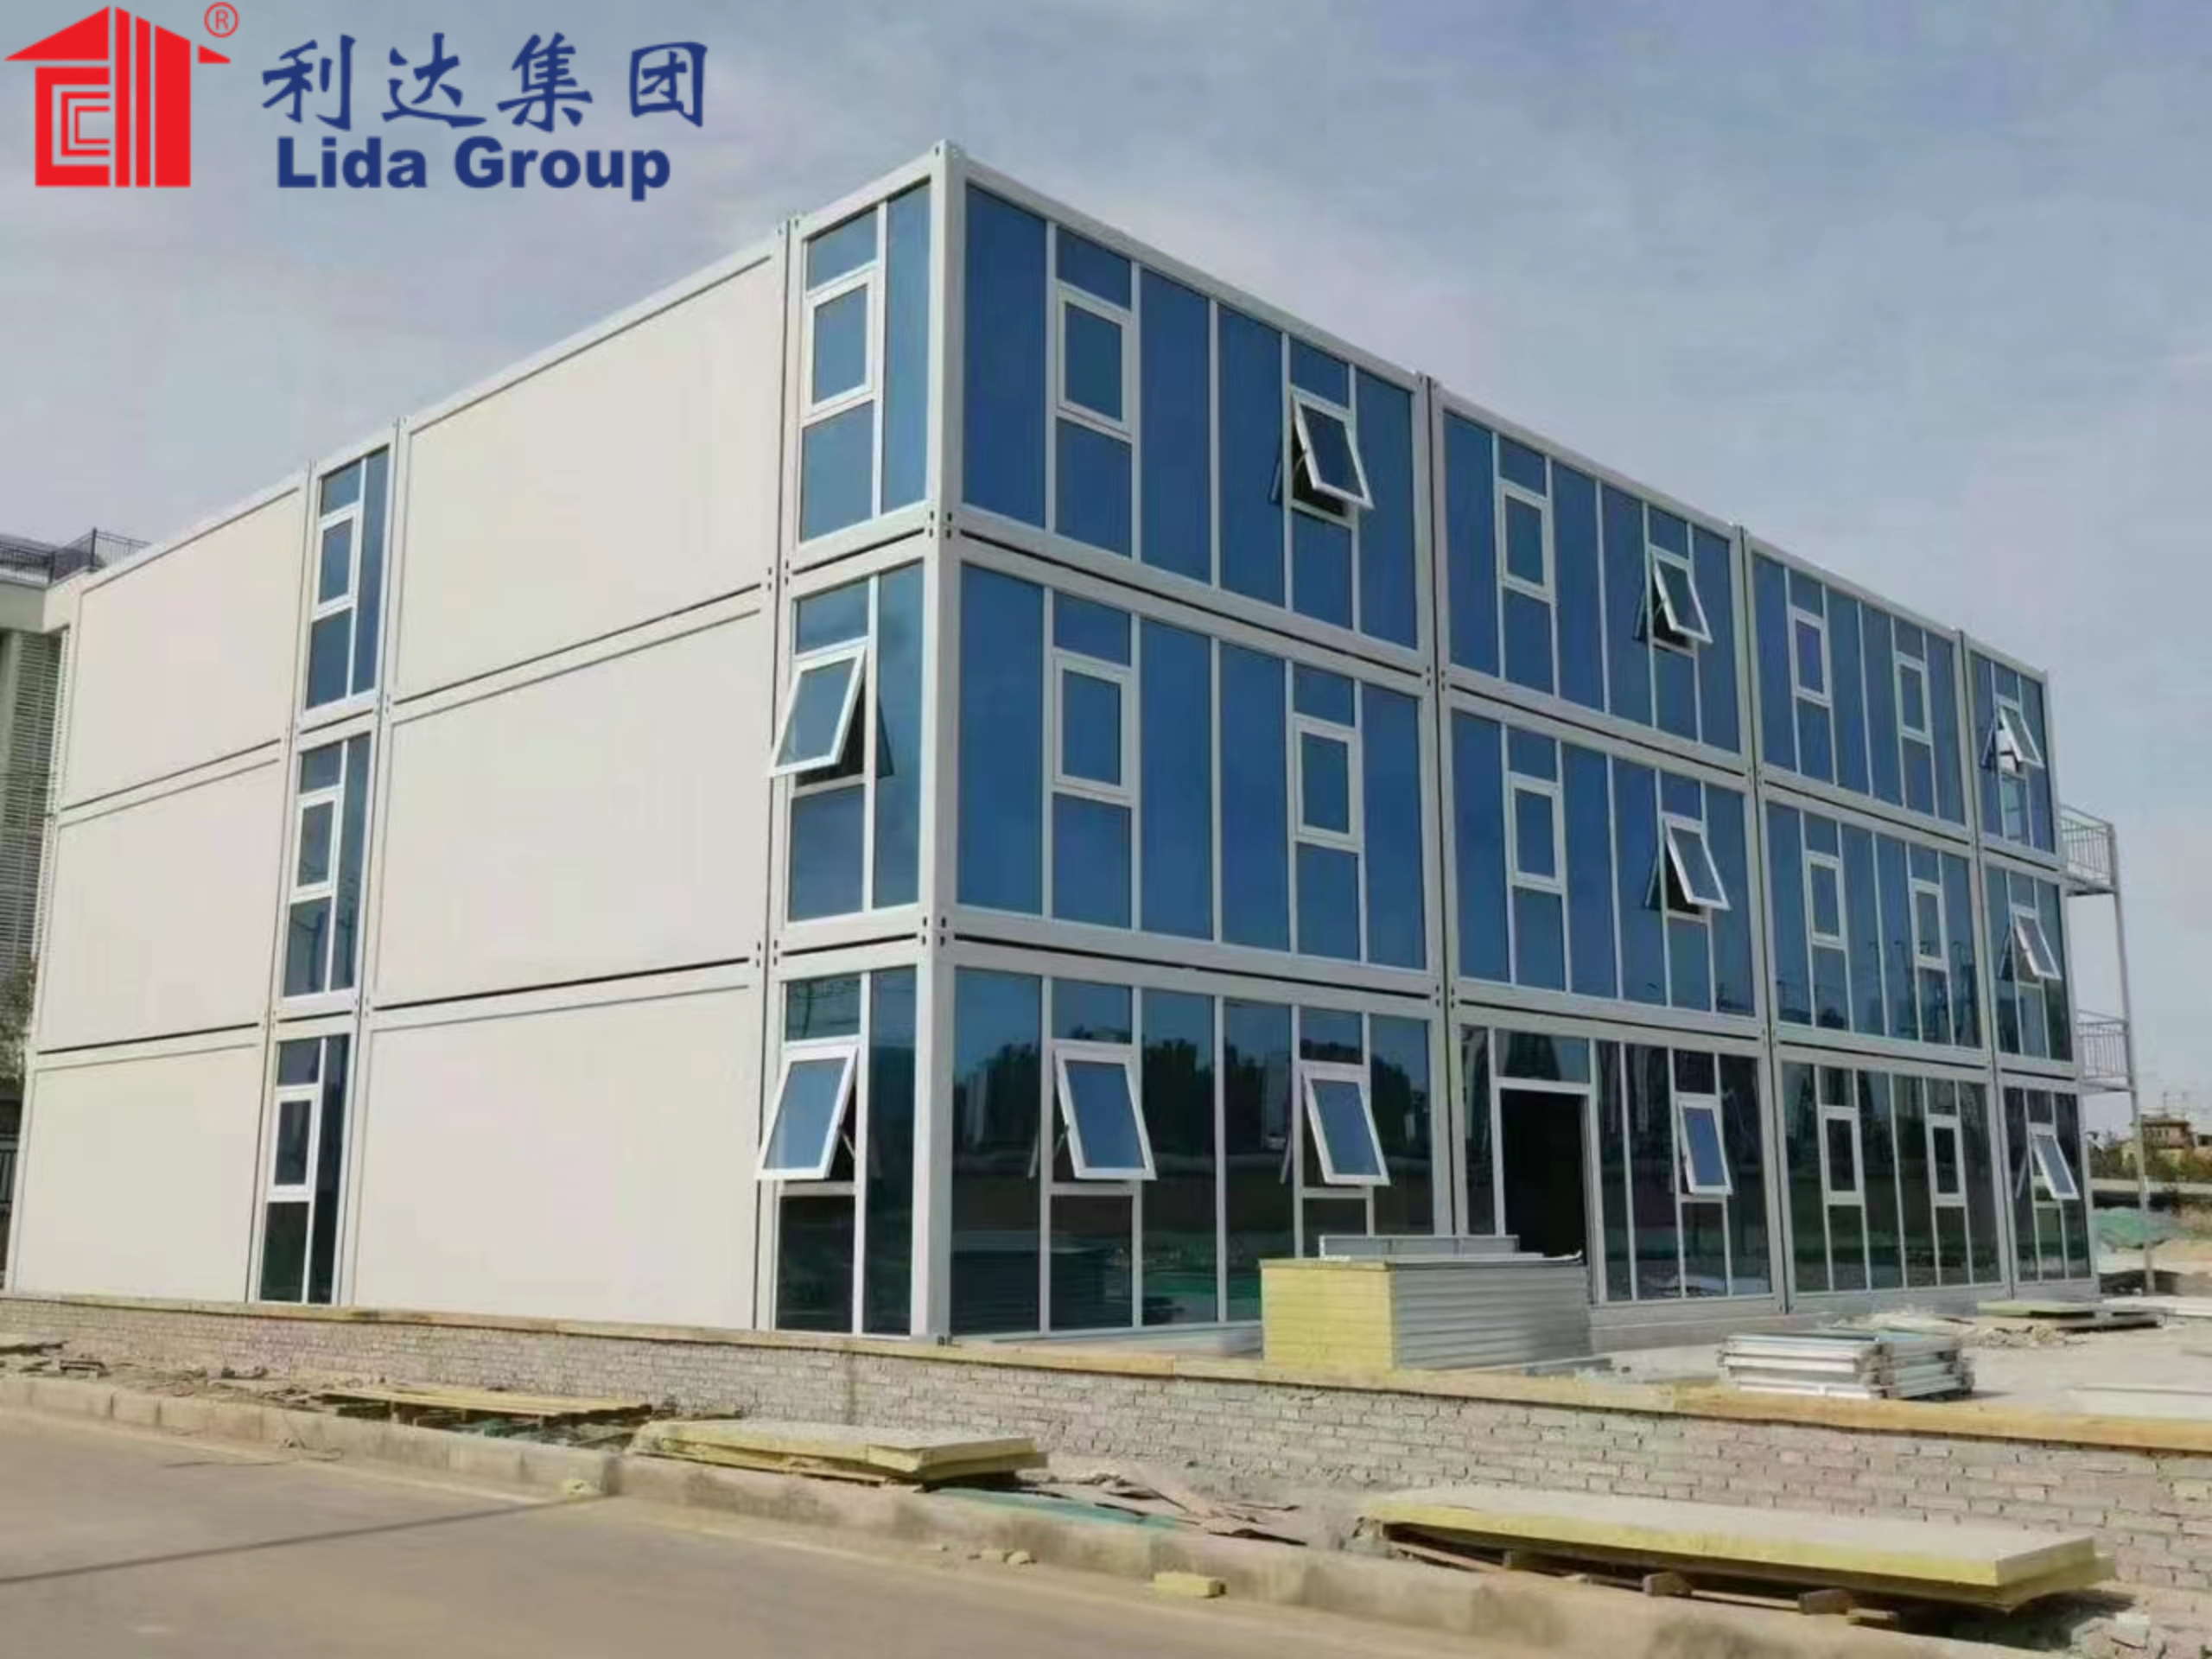 Government study endorses Lida Group's proposal to alleviate rural worker shortages with mass produced high quality prefabricated container dormitories assembled in just 4 weeks.